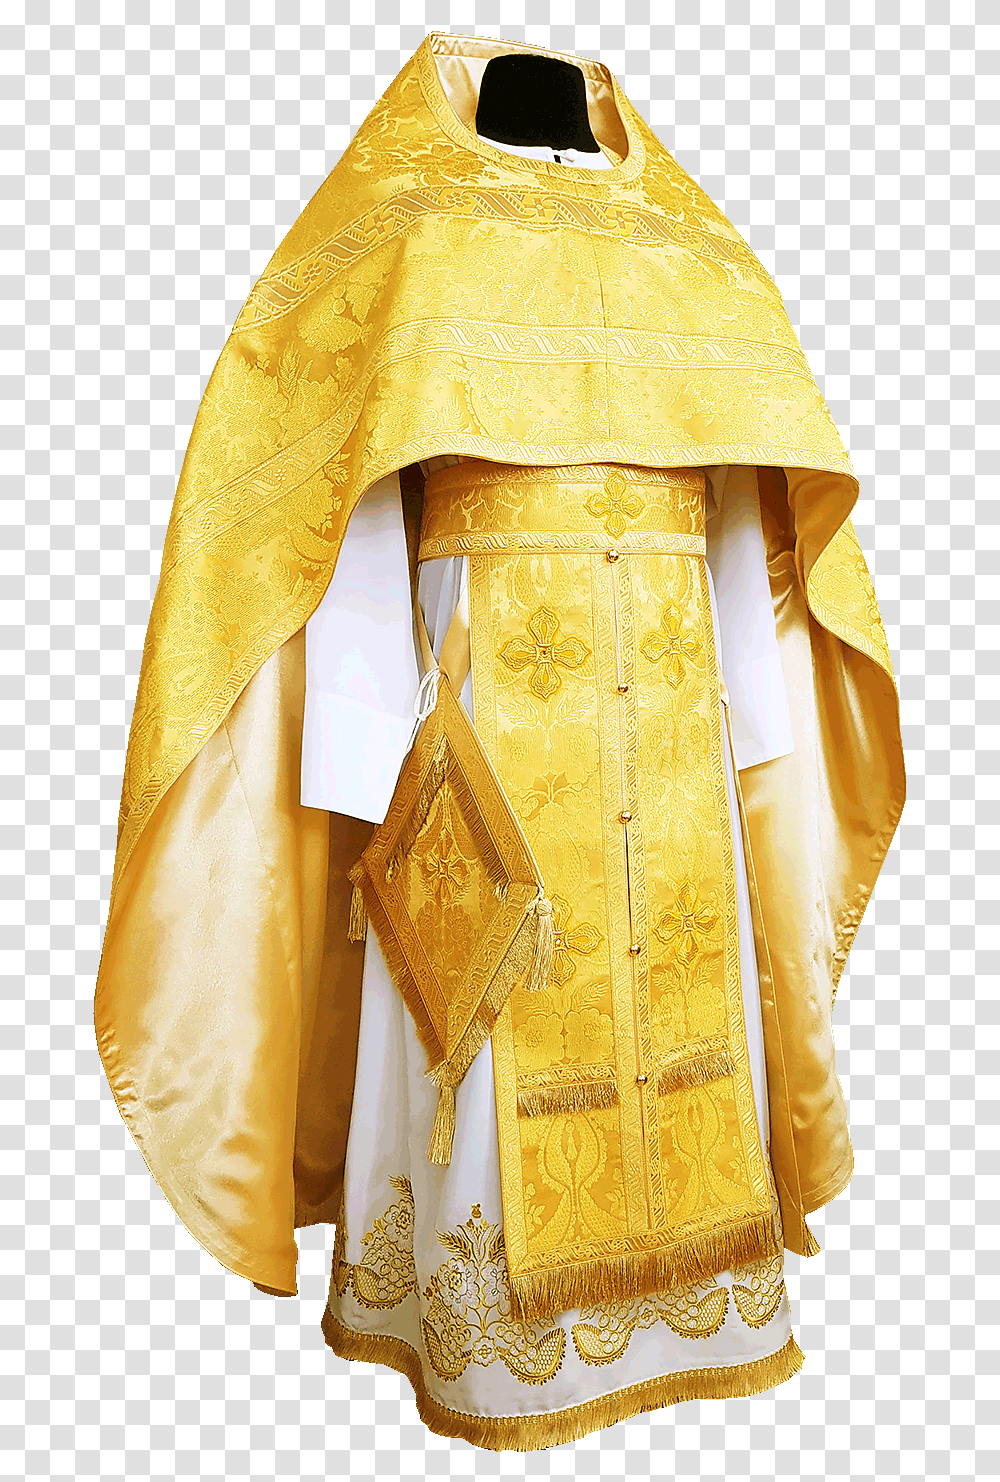 Priest Vestment Yellow Priest Vestments, Clothing, Apparel, Robe, Fashion Transparent Png